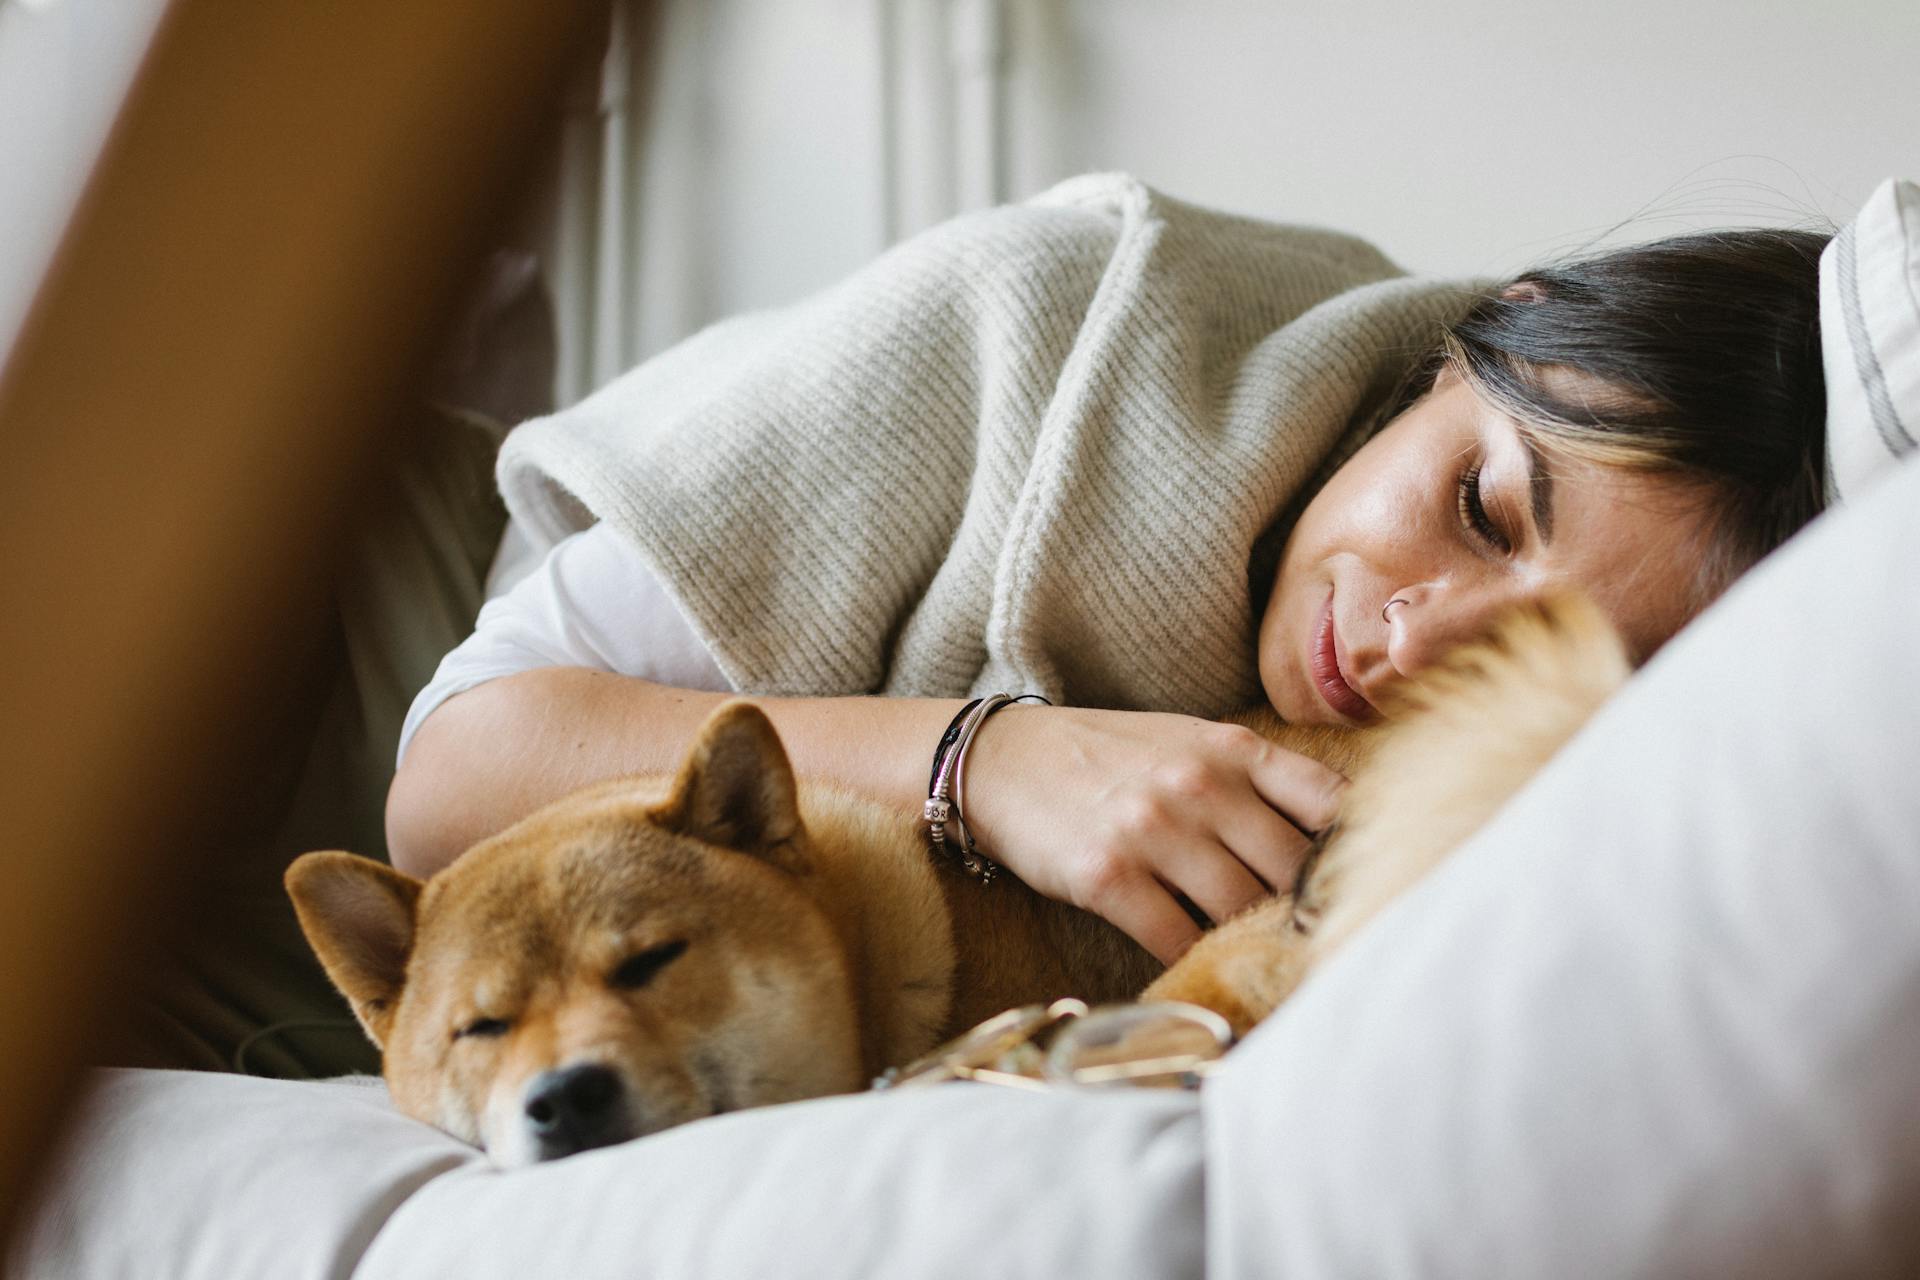 A woman sleeping in bed next to a dog